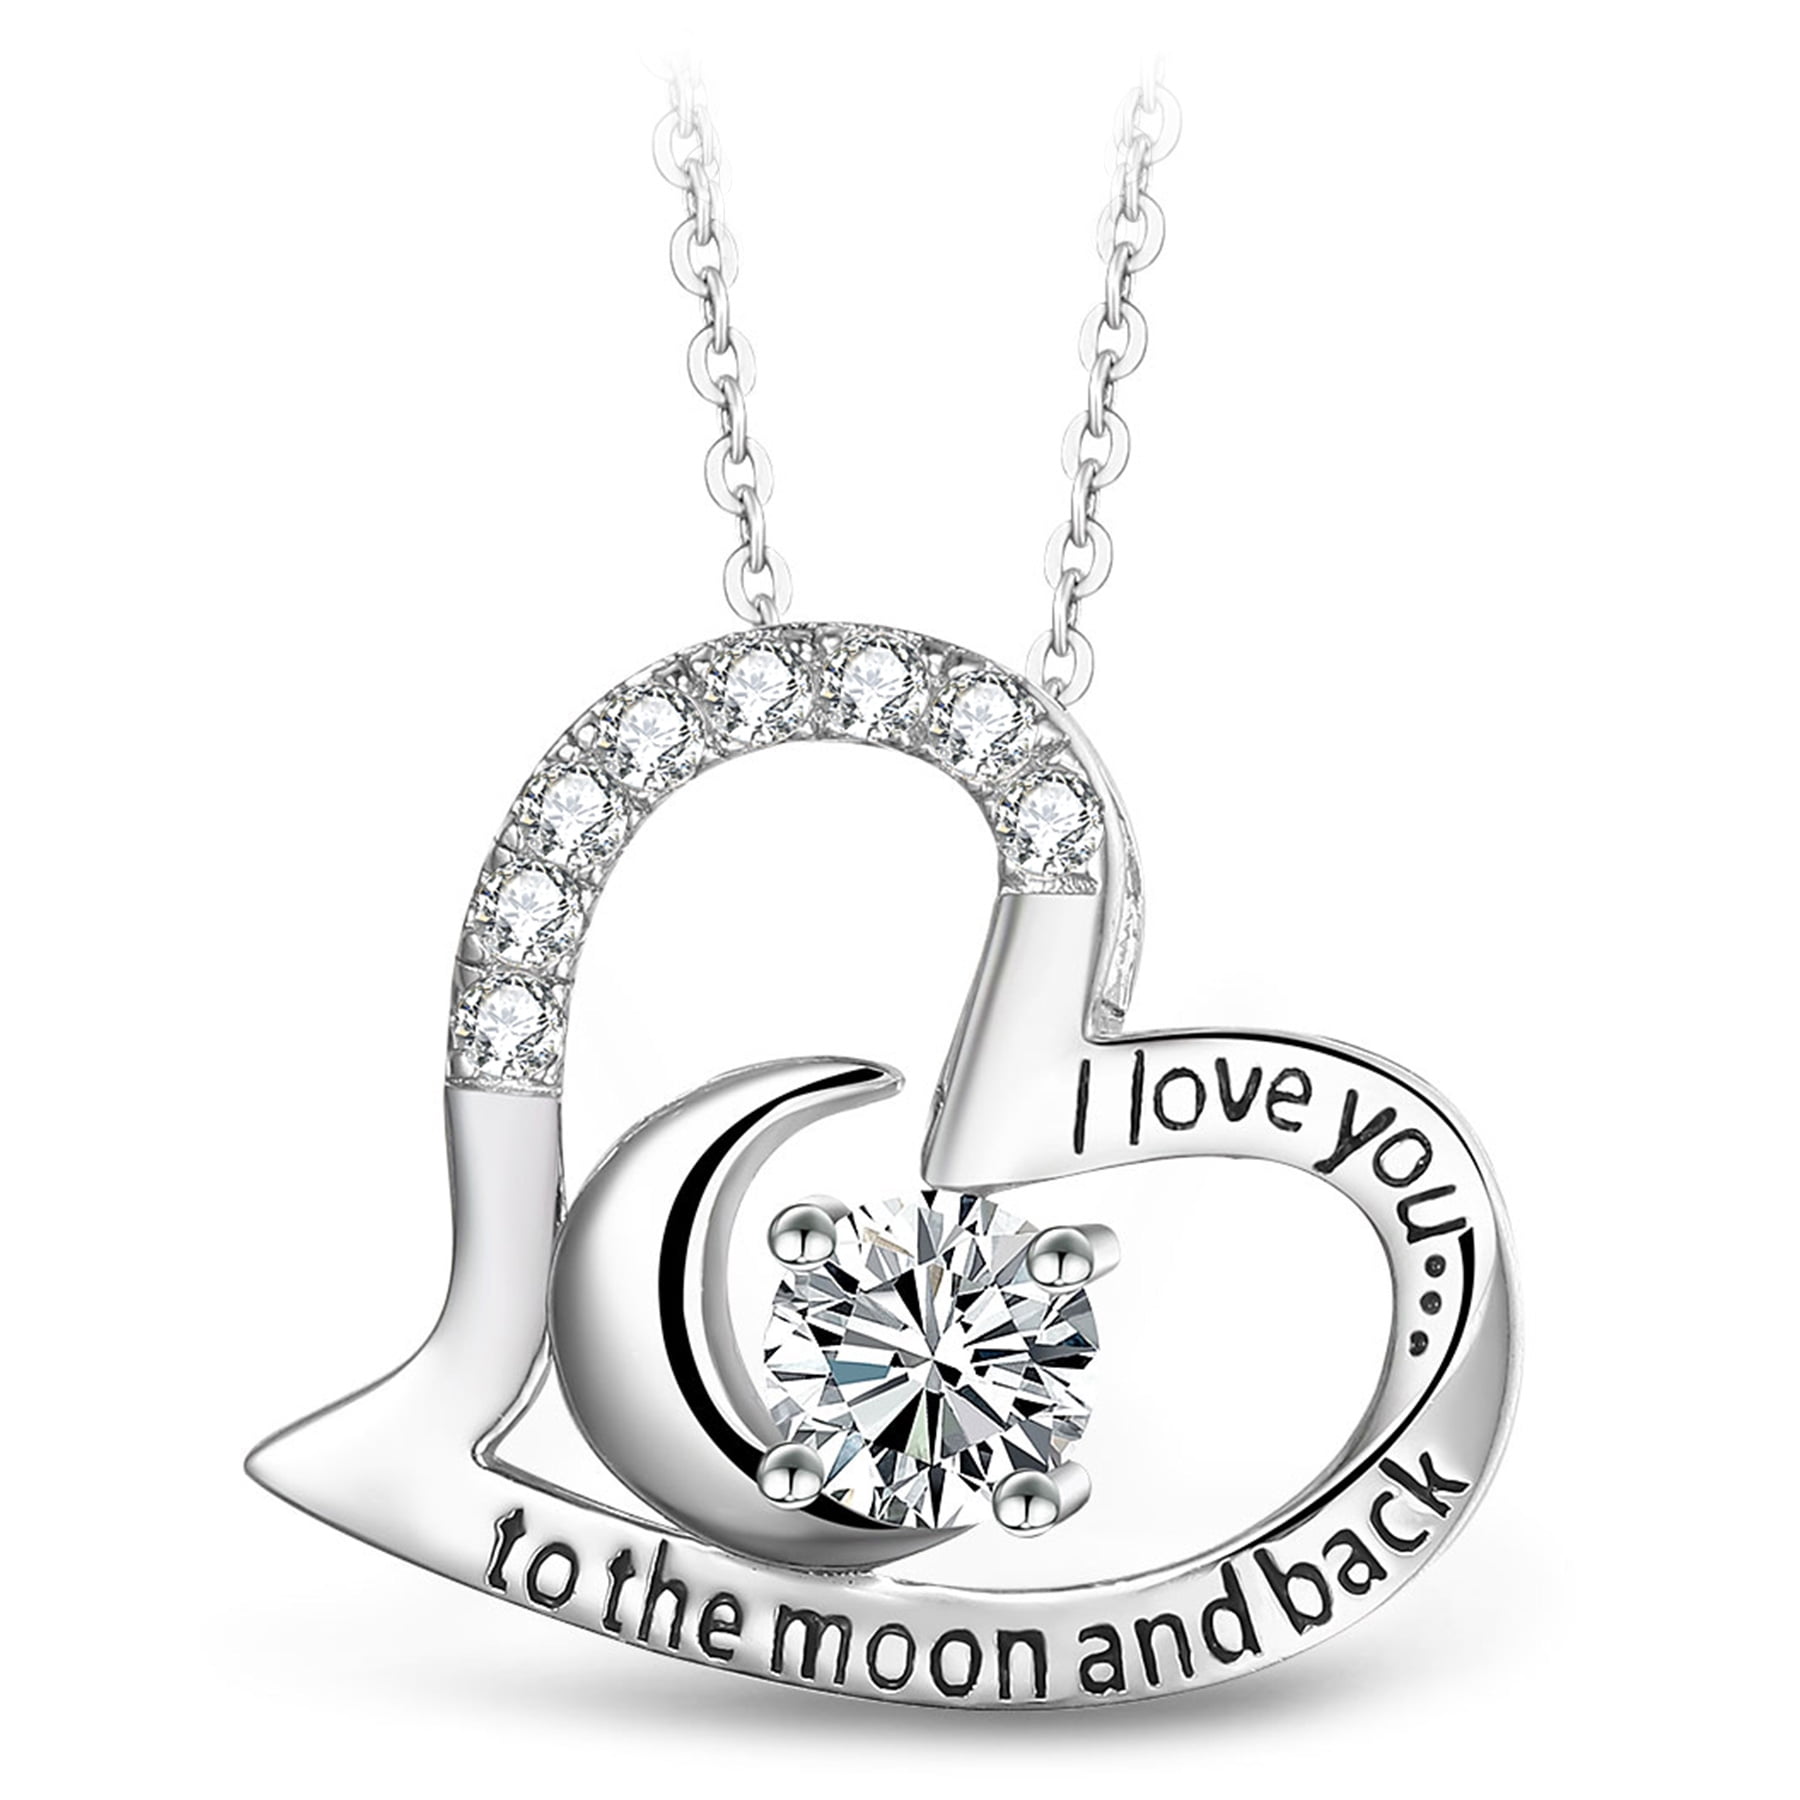 6 Crescent Moon Charms Antique Silver I Love You to The Moon and Back Pendants 